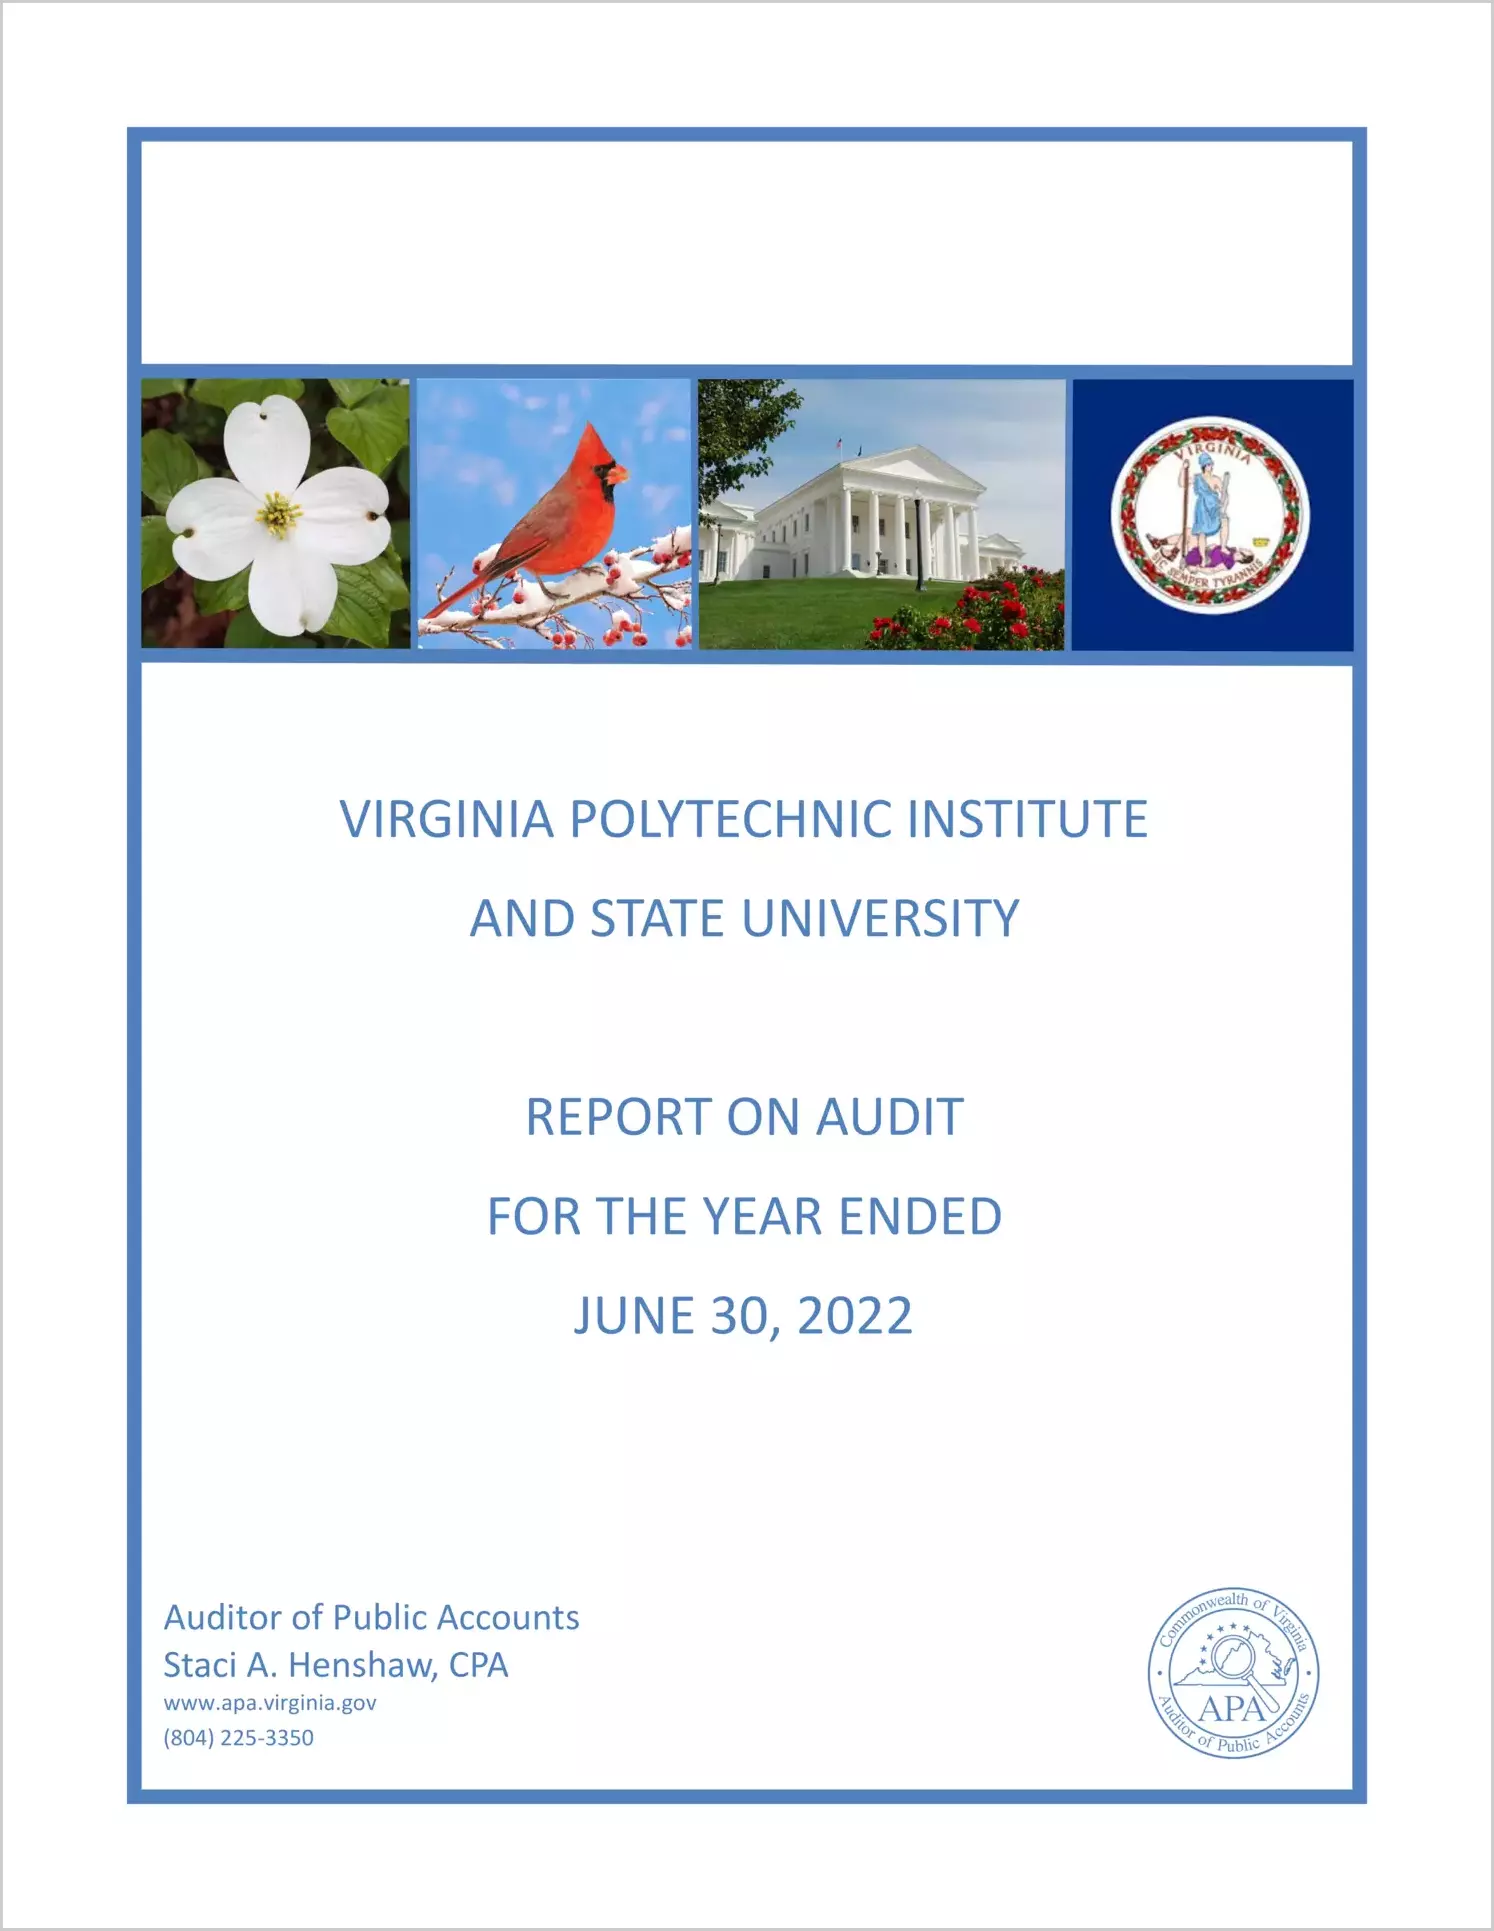 Virginia Polytechnic Institute and State University for the year ended June 30, 2022